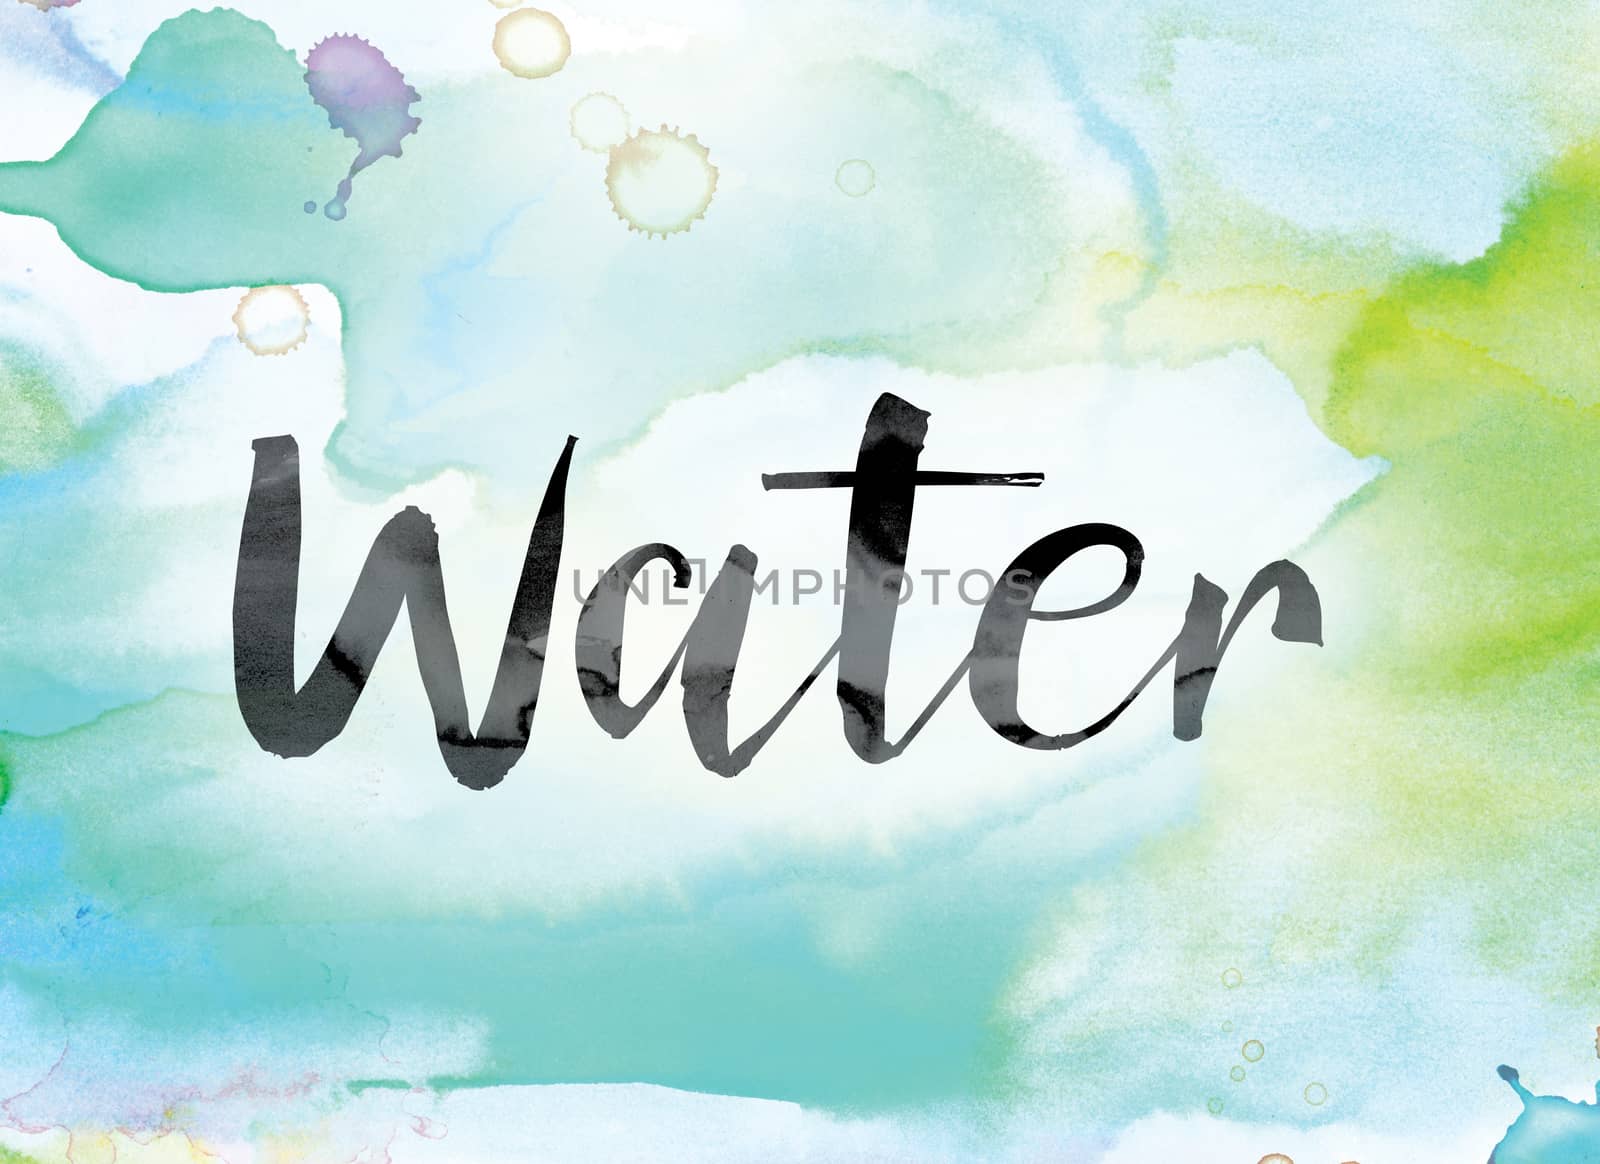 The word "Water" painted in black ink over a colorful watercolor washed background concept and theme.